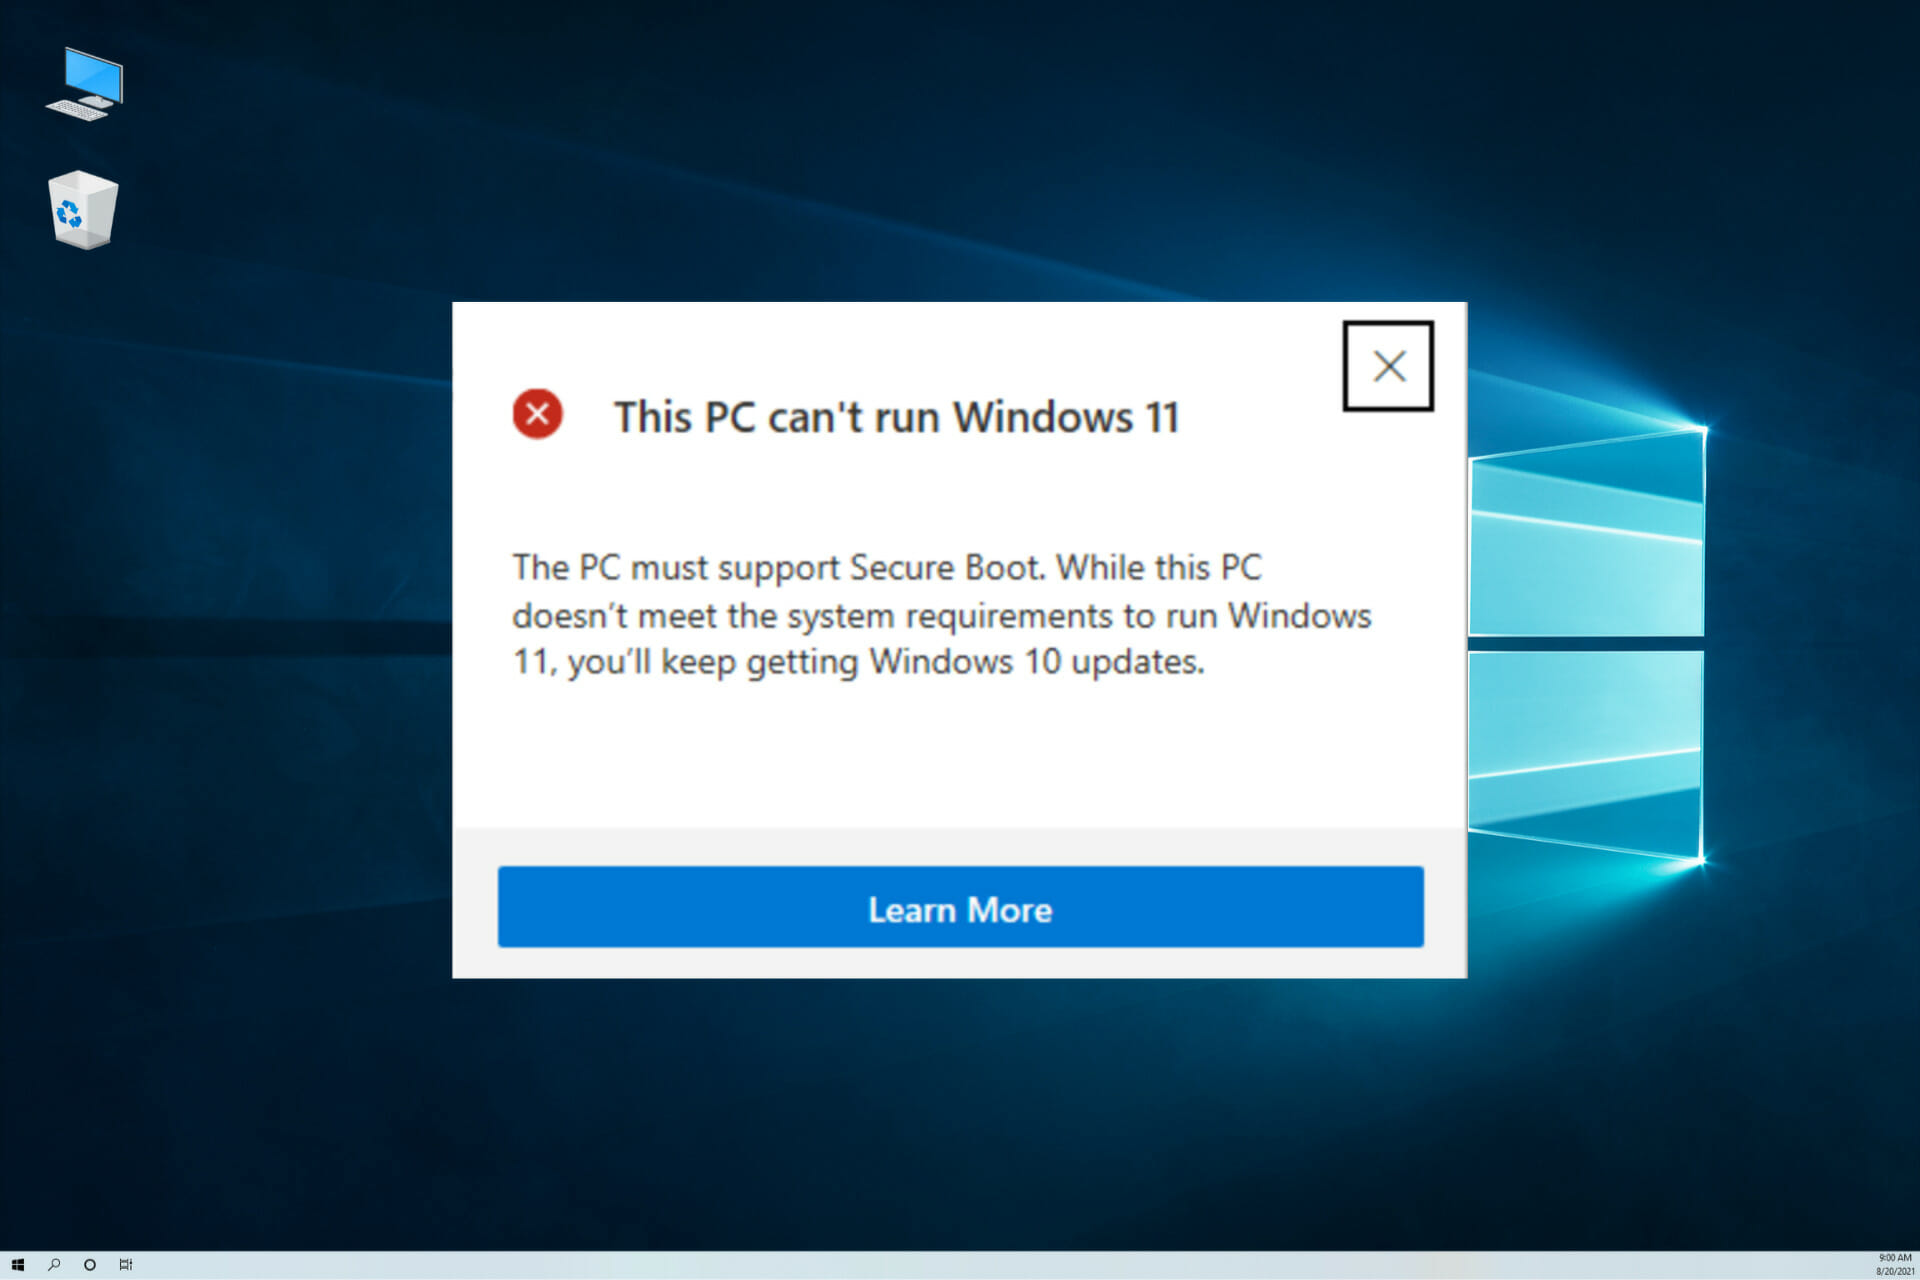 Quick guide on what to do if Windows 11 is not booting